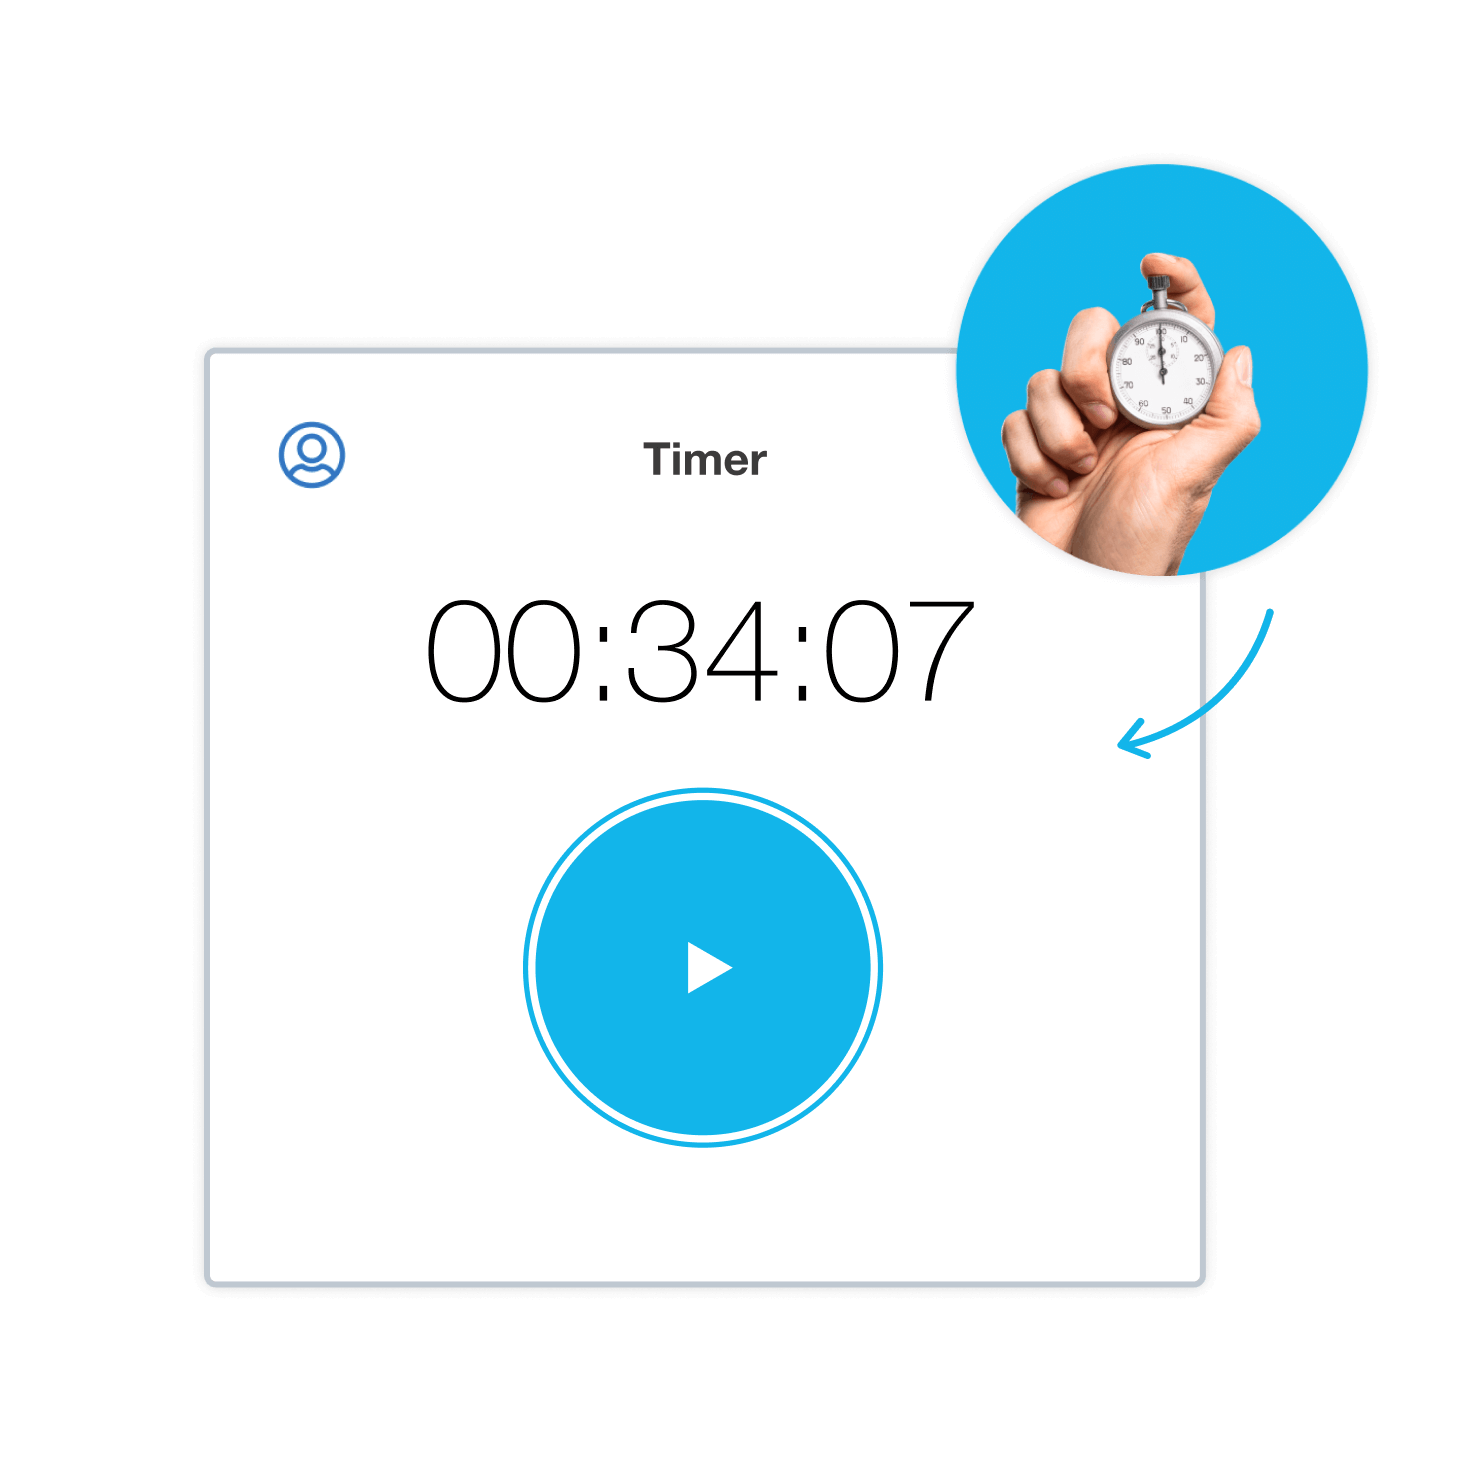 An employee clicks to restart the start-stop timer on their time tracking software which has already recorded 34 minutes on the job.